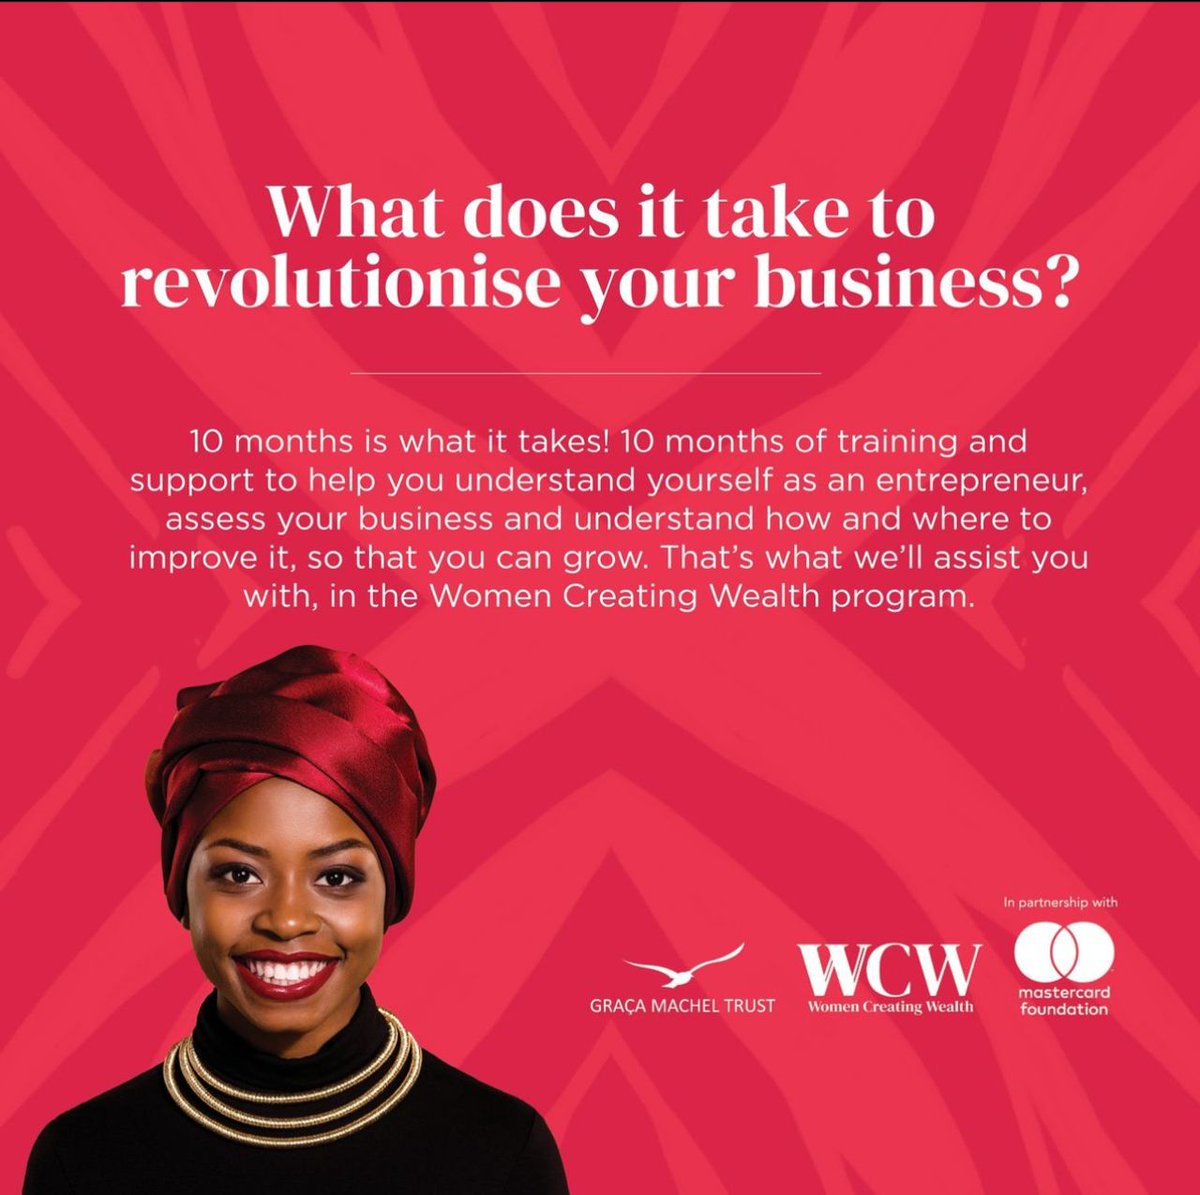 Empowering Women Entrepreneurs for Wealth Creation in Southern & East Africa. Join the Graça Machel Trust's flagship program to scale your business and transition from income generation to wealth creation. Over 2000 women entrepreneurs benefit. Apply 👇 gracamacheltrust.org/wcw-campaign/